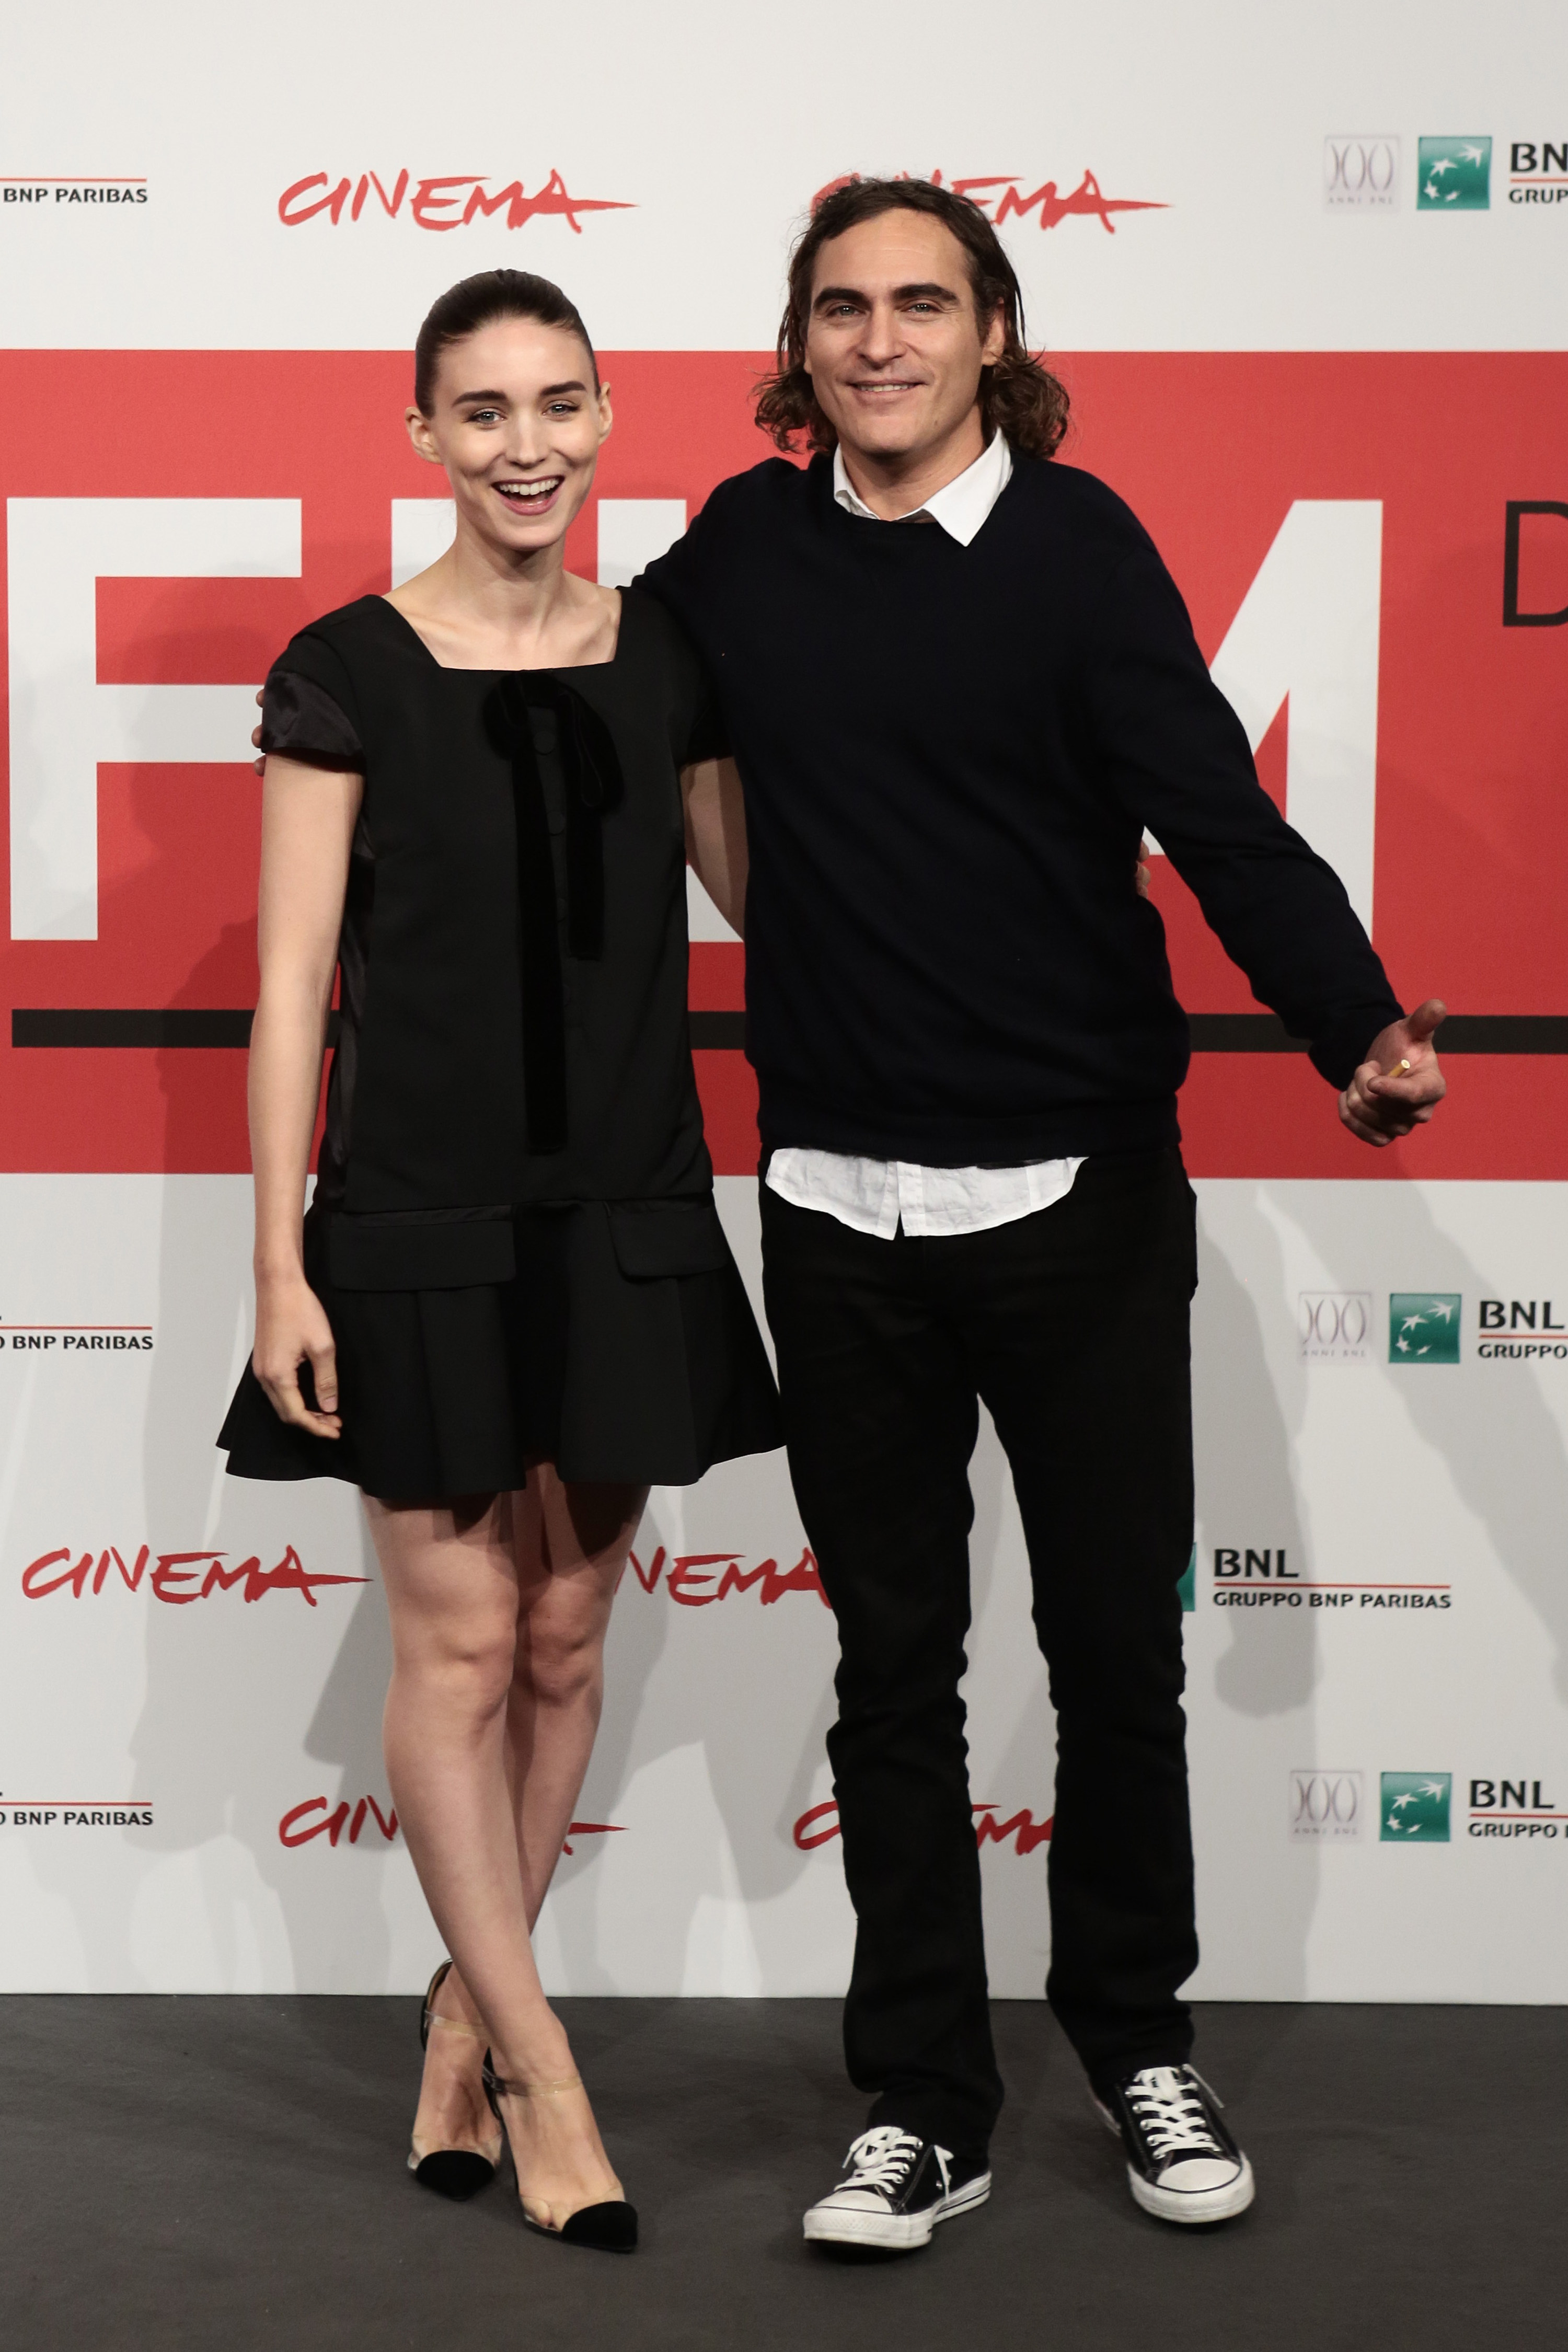 Rooney Mara and Joaquin Phoenix attend the photocall of movie Her, presented in competition at the 8th International Rome Film Festival.